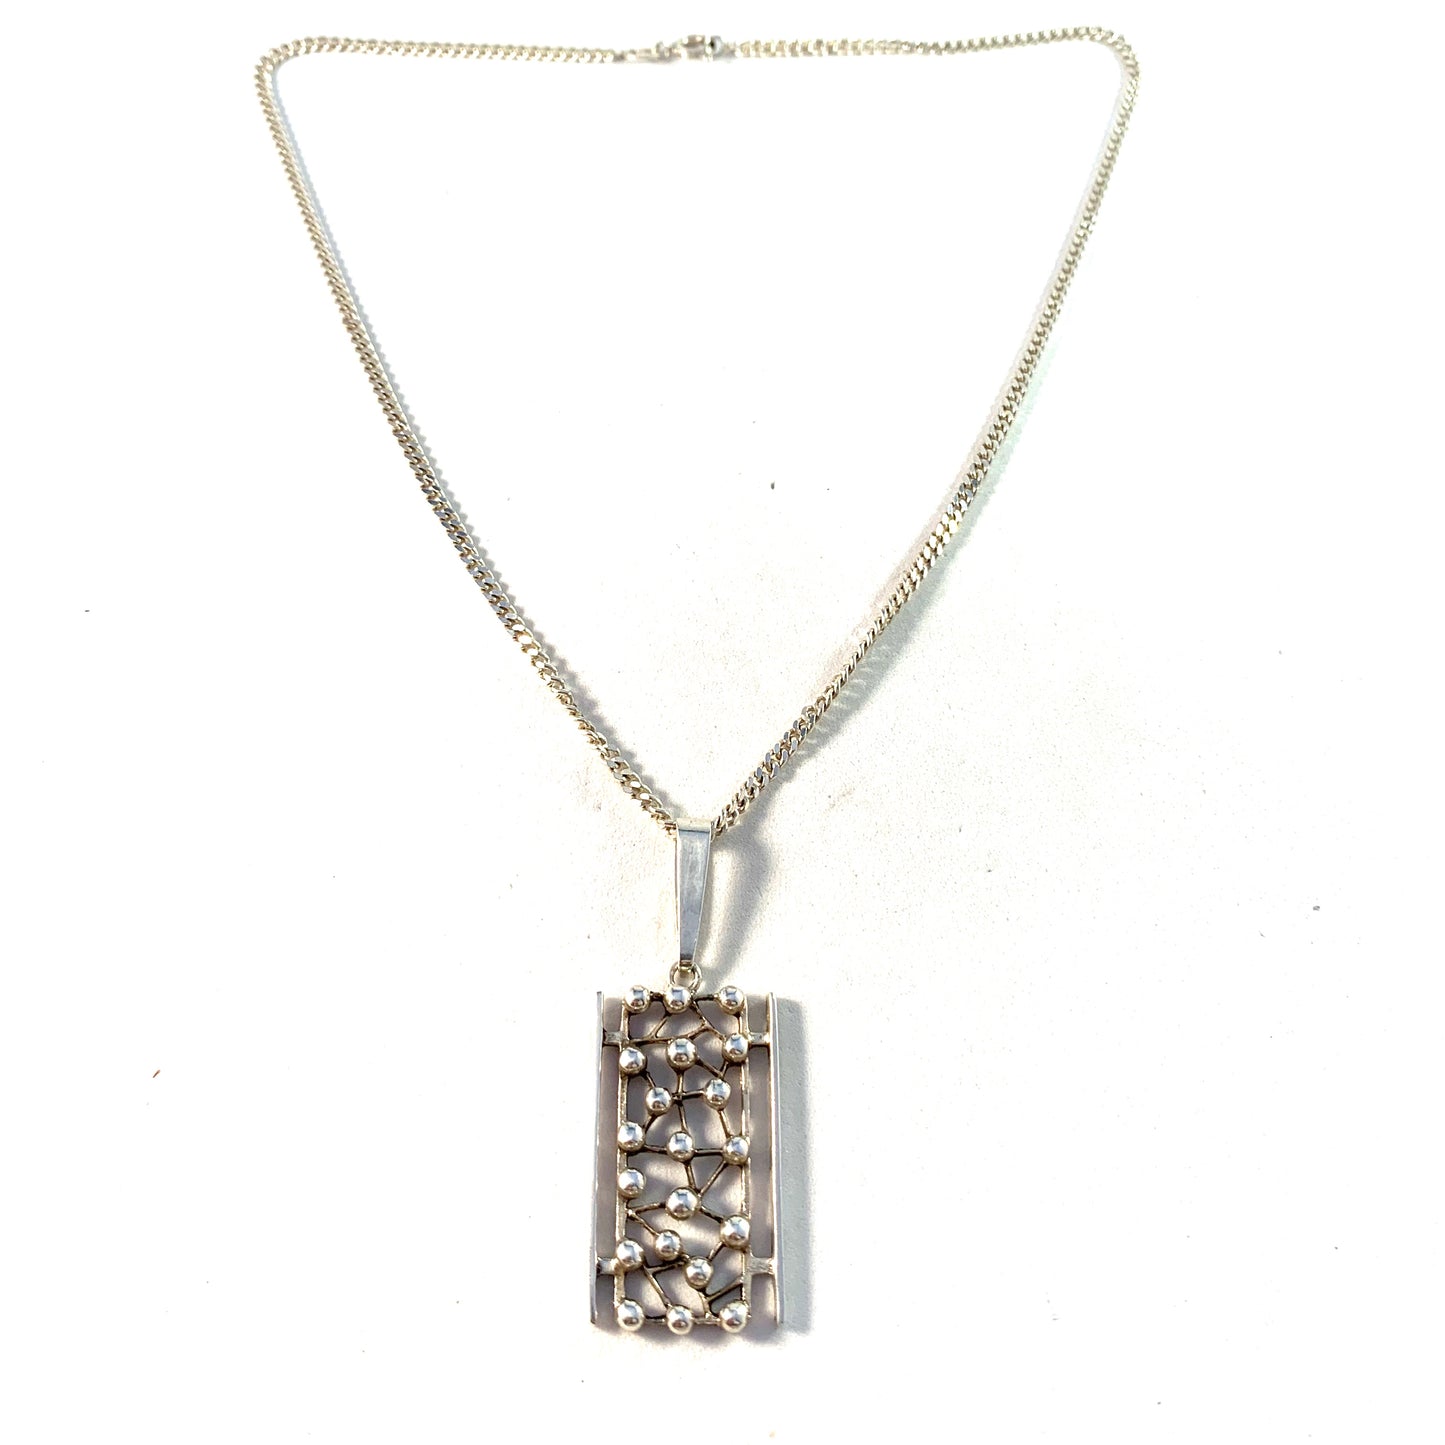 Italy 1970s Modernist Sterling Silver Pendant Necklace.